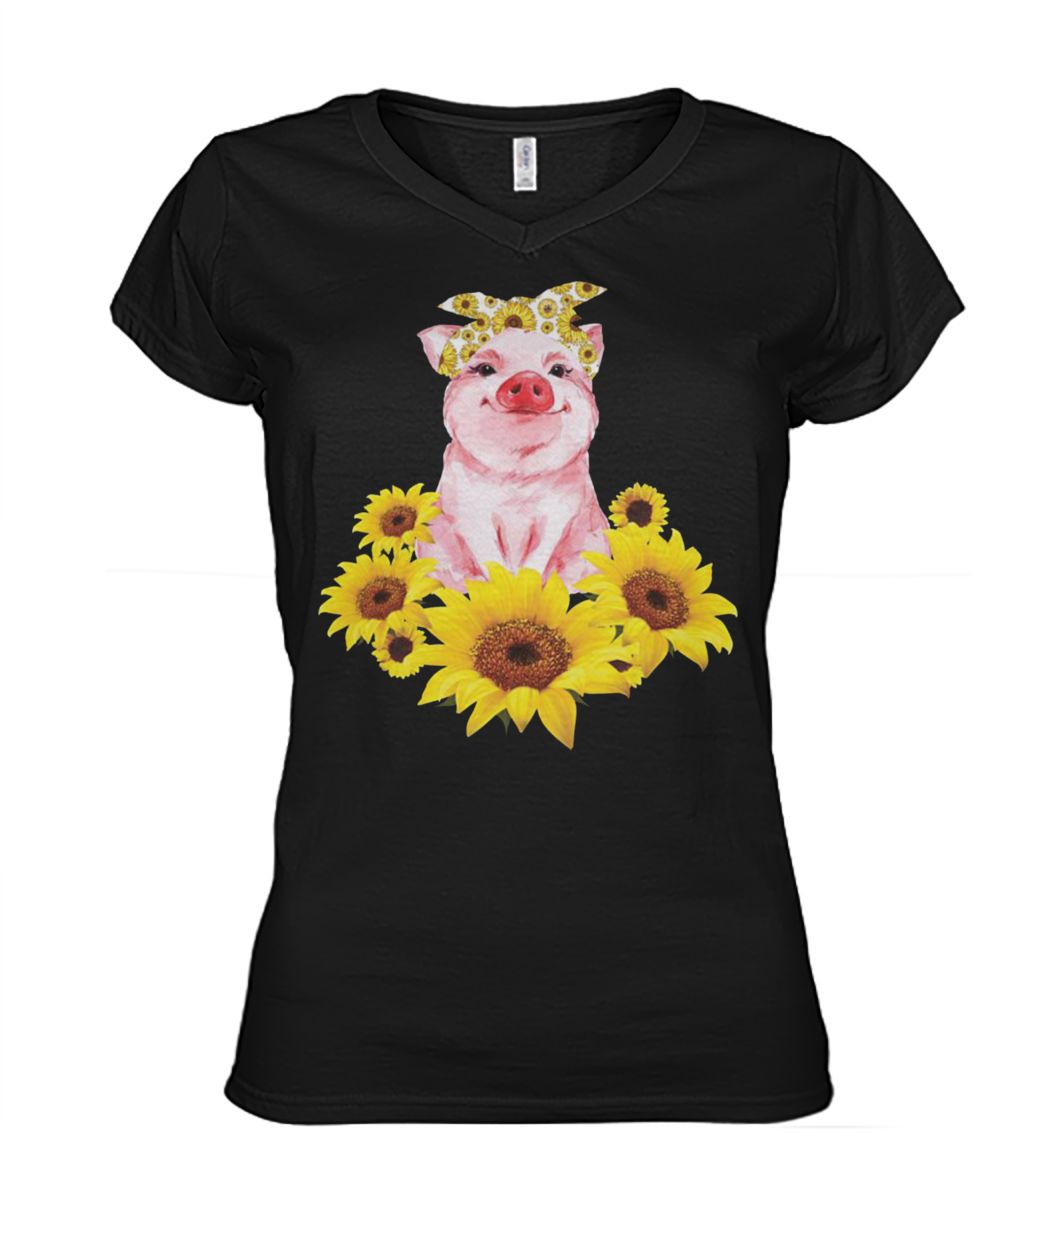 Cute pig with sunflowers women's v-neck